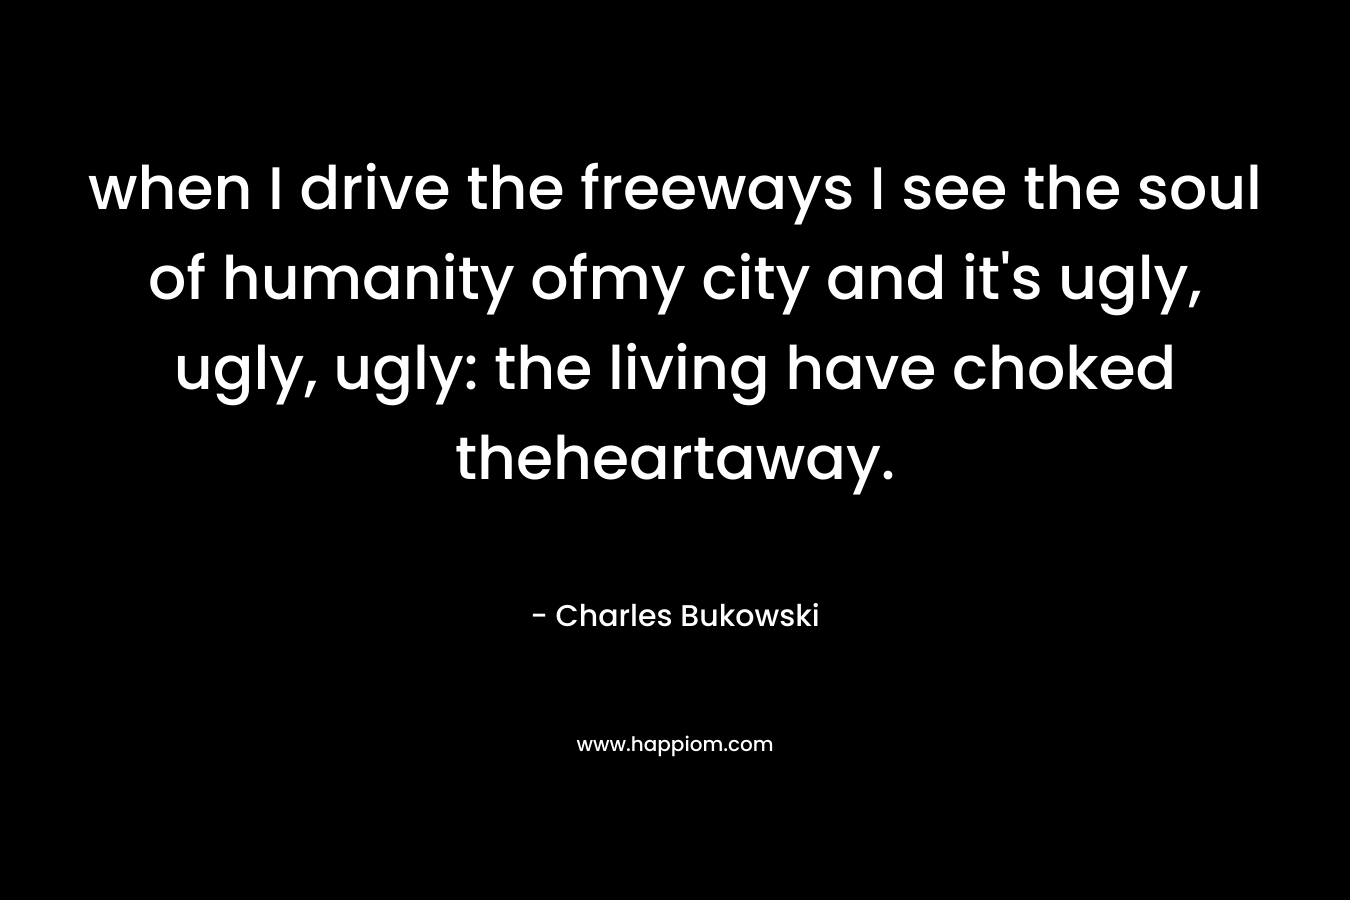 when I drive the freeways I see the soul of humanity ofmy city and it’s ugly, ugly, ugly: the living have choked theheartaway. – Charles Bukowski